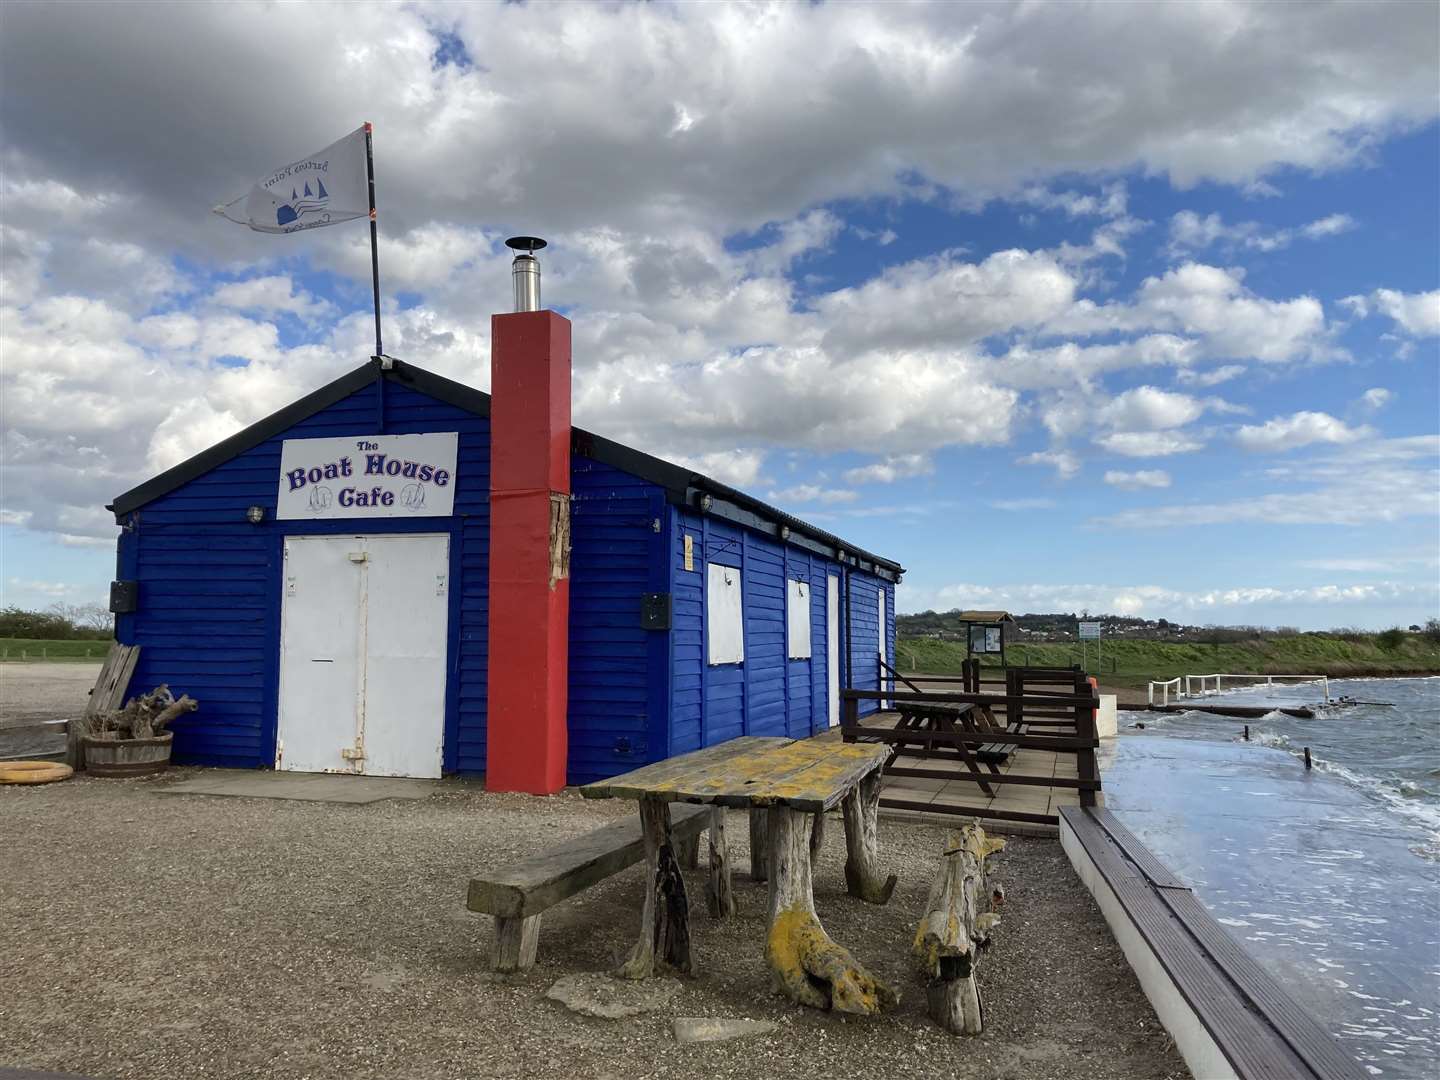 The Boat House cafe and boating lake at Barton's Point Coastal Park at Sheerness on the Isle of Sheppey